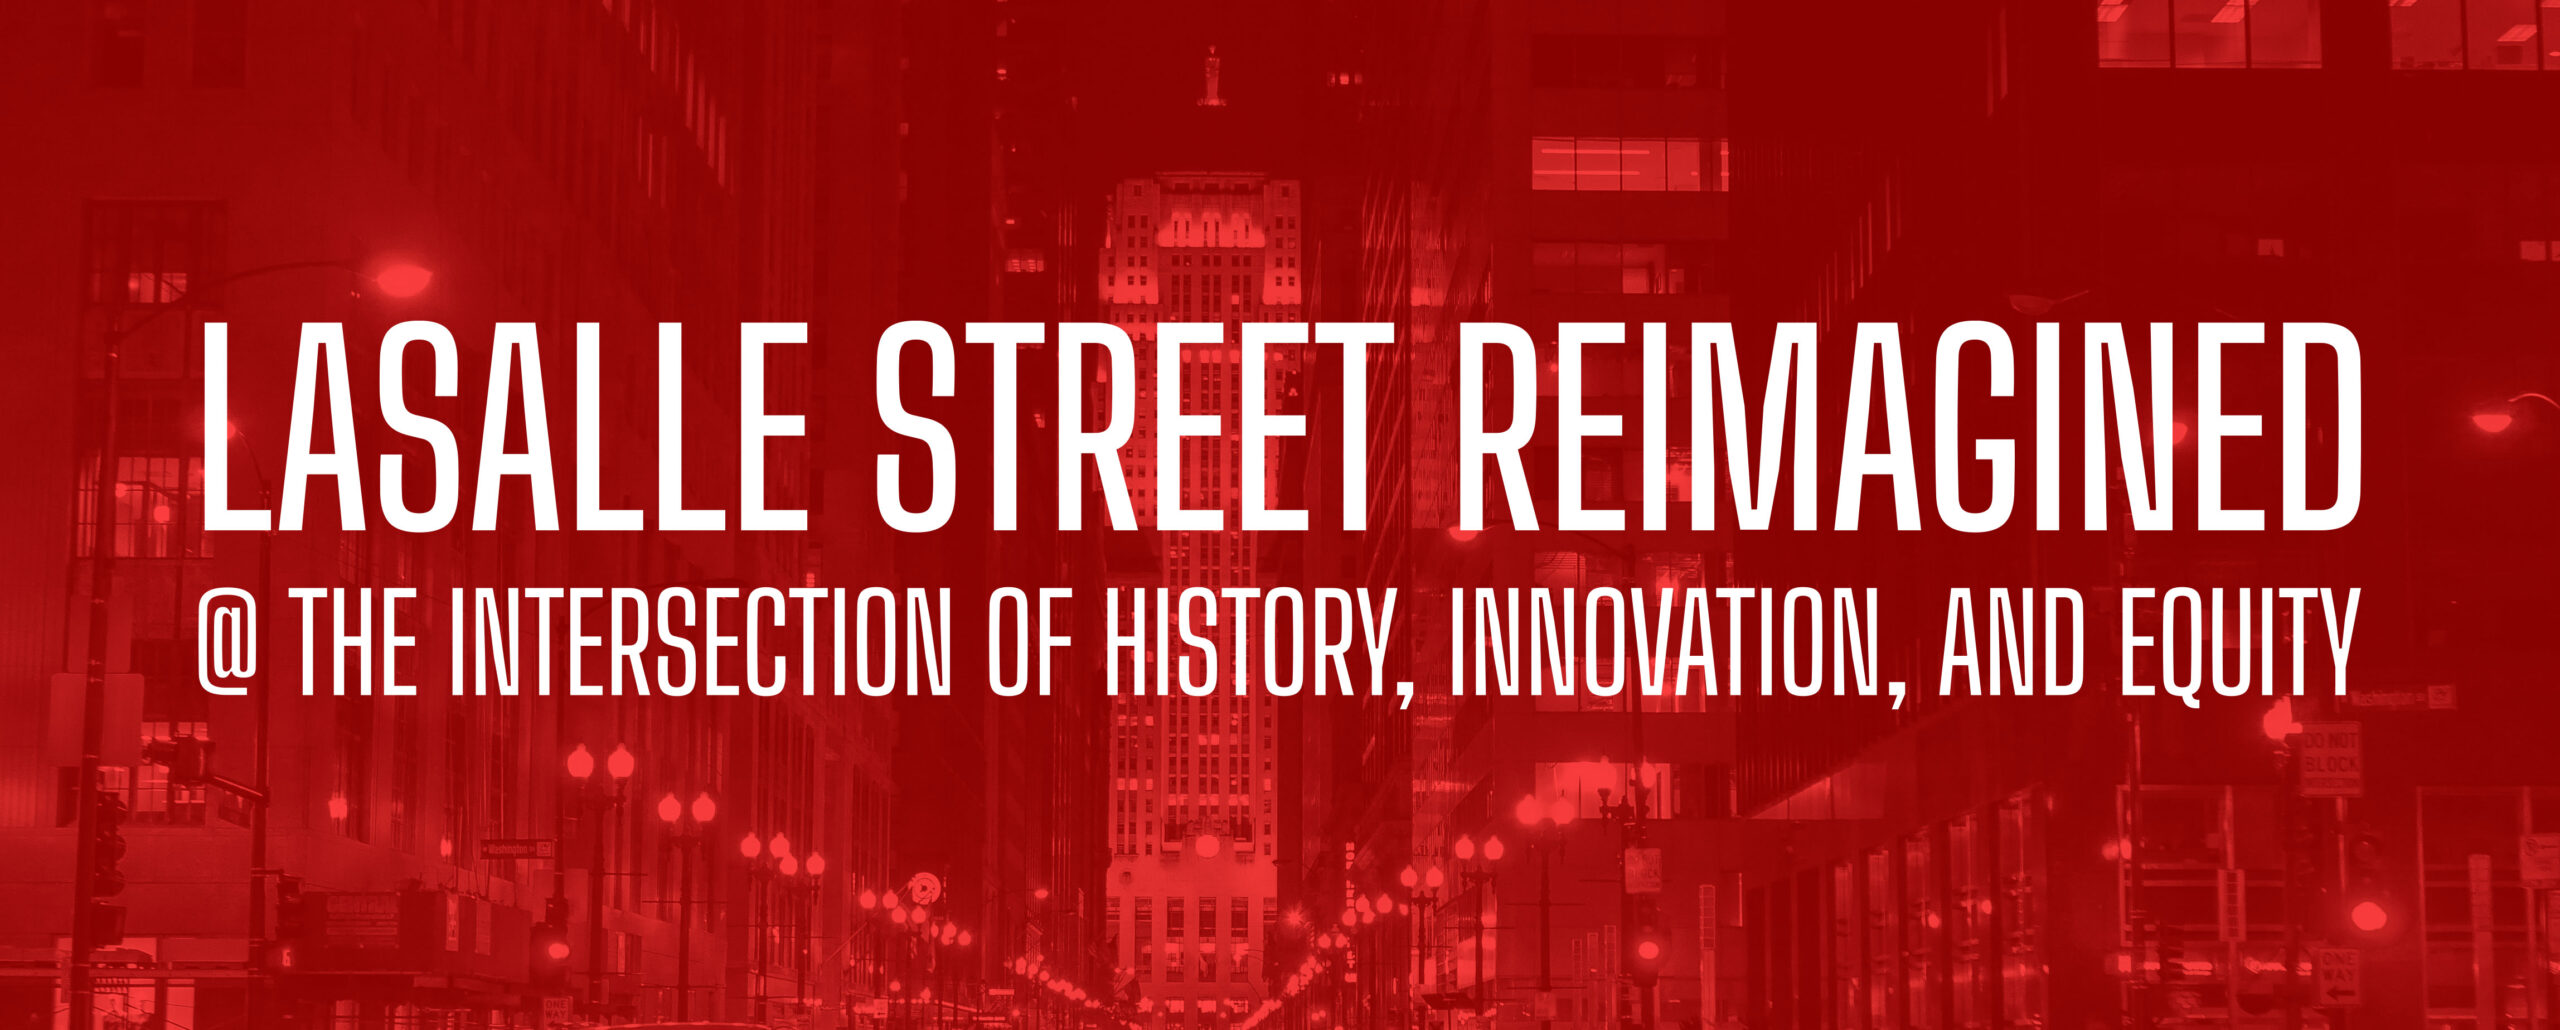 LaSalle Reimagined @ the intersection of history, innovation, and equity